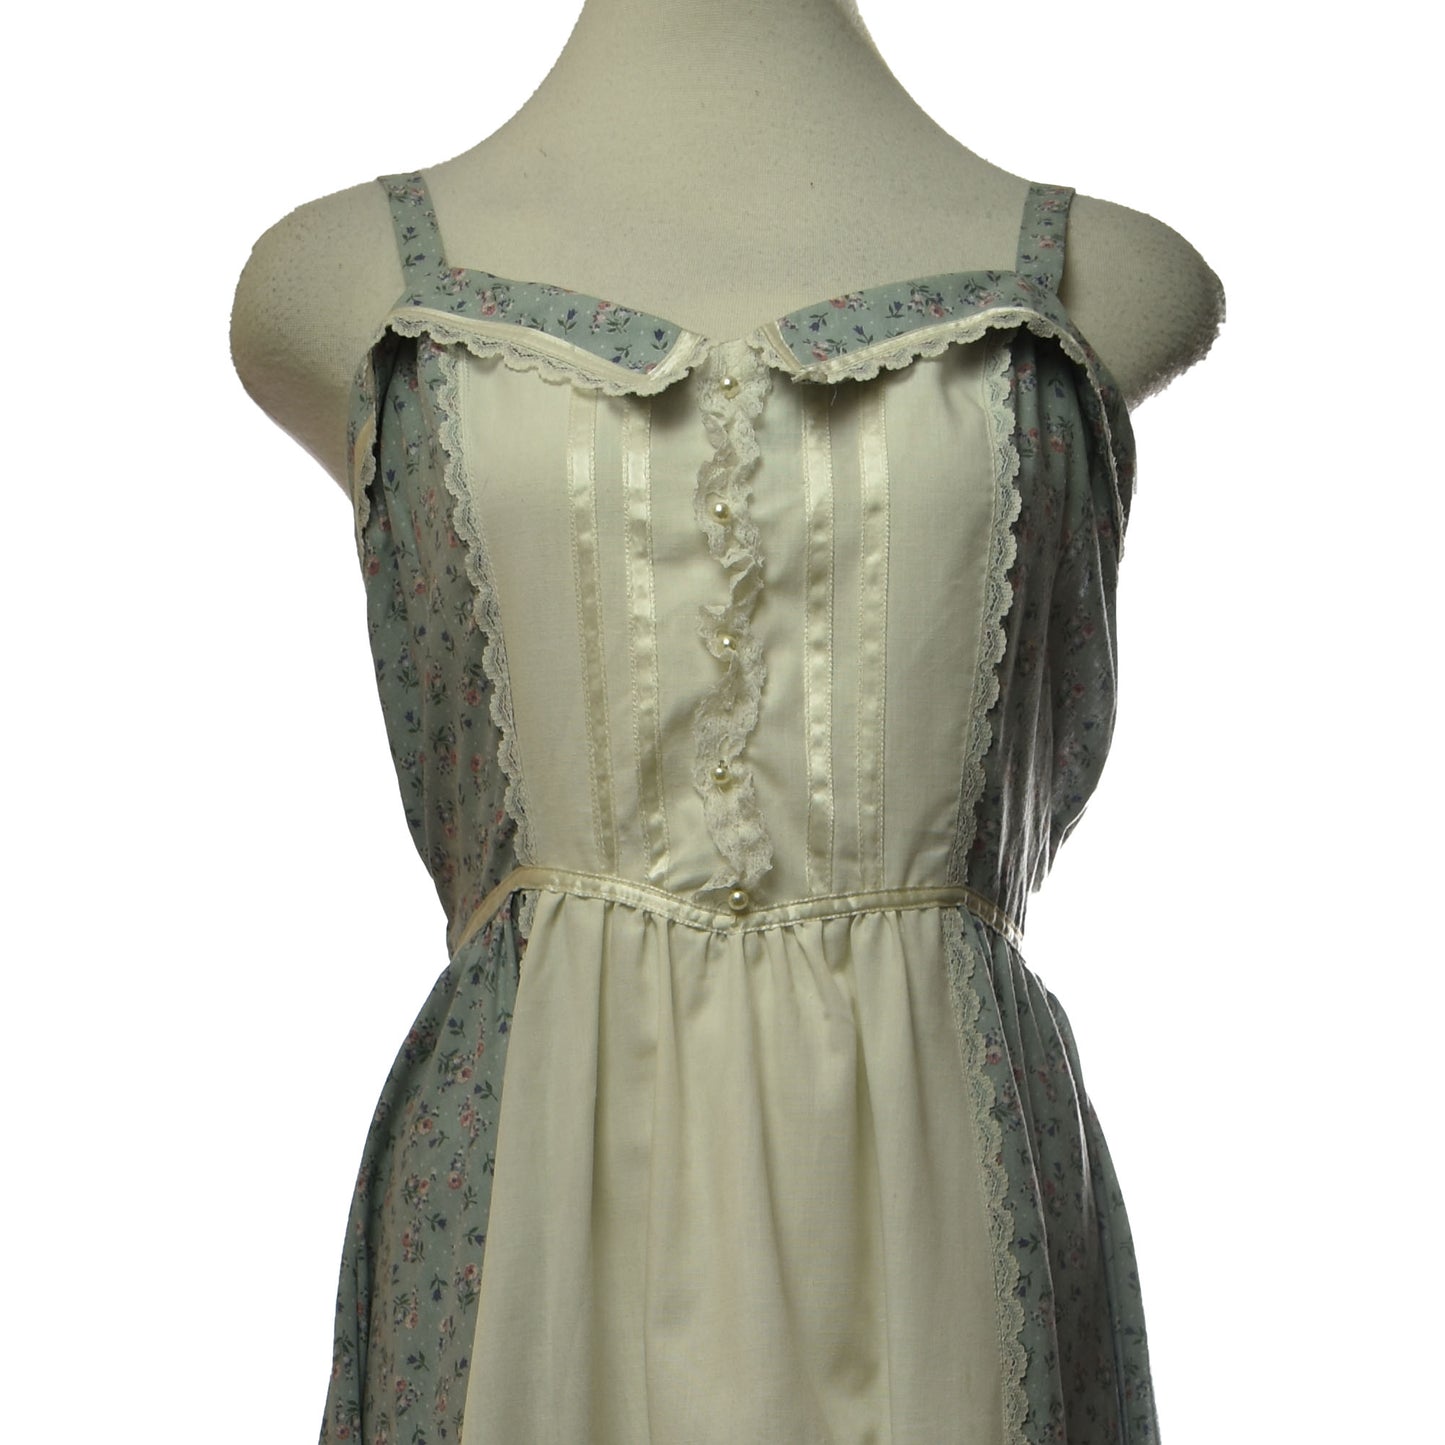 Vintage 1970's Light Blue Floral Print Gunne Sax by Jessica Sleeveless Prairie Style Dress with Lace Detailing